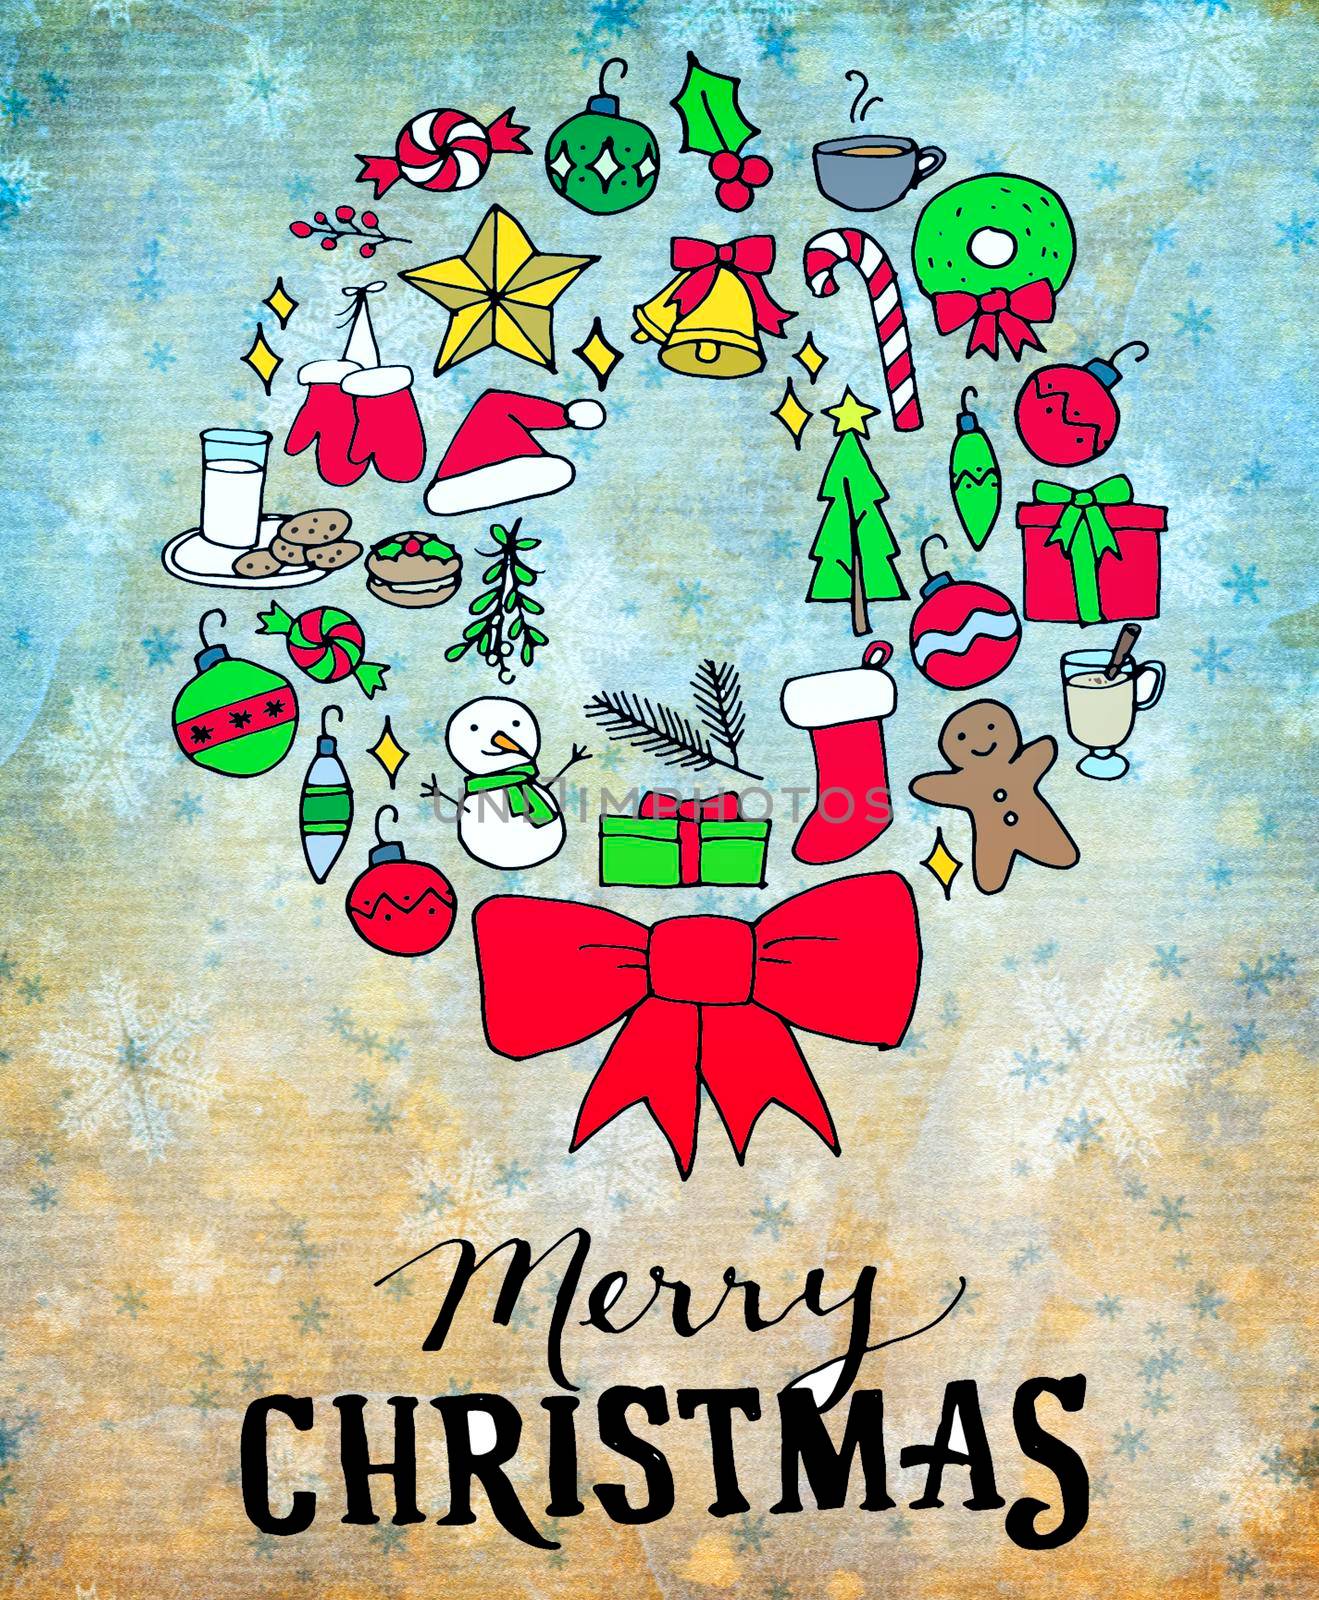 Christmas and new year card with the image of Santa Claus and Christmas decorations on a red background.